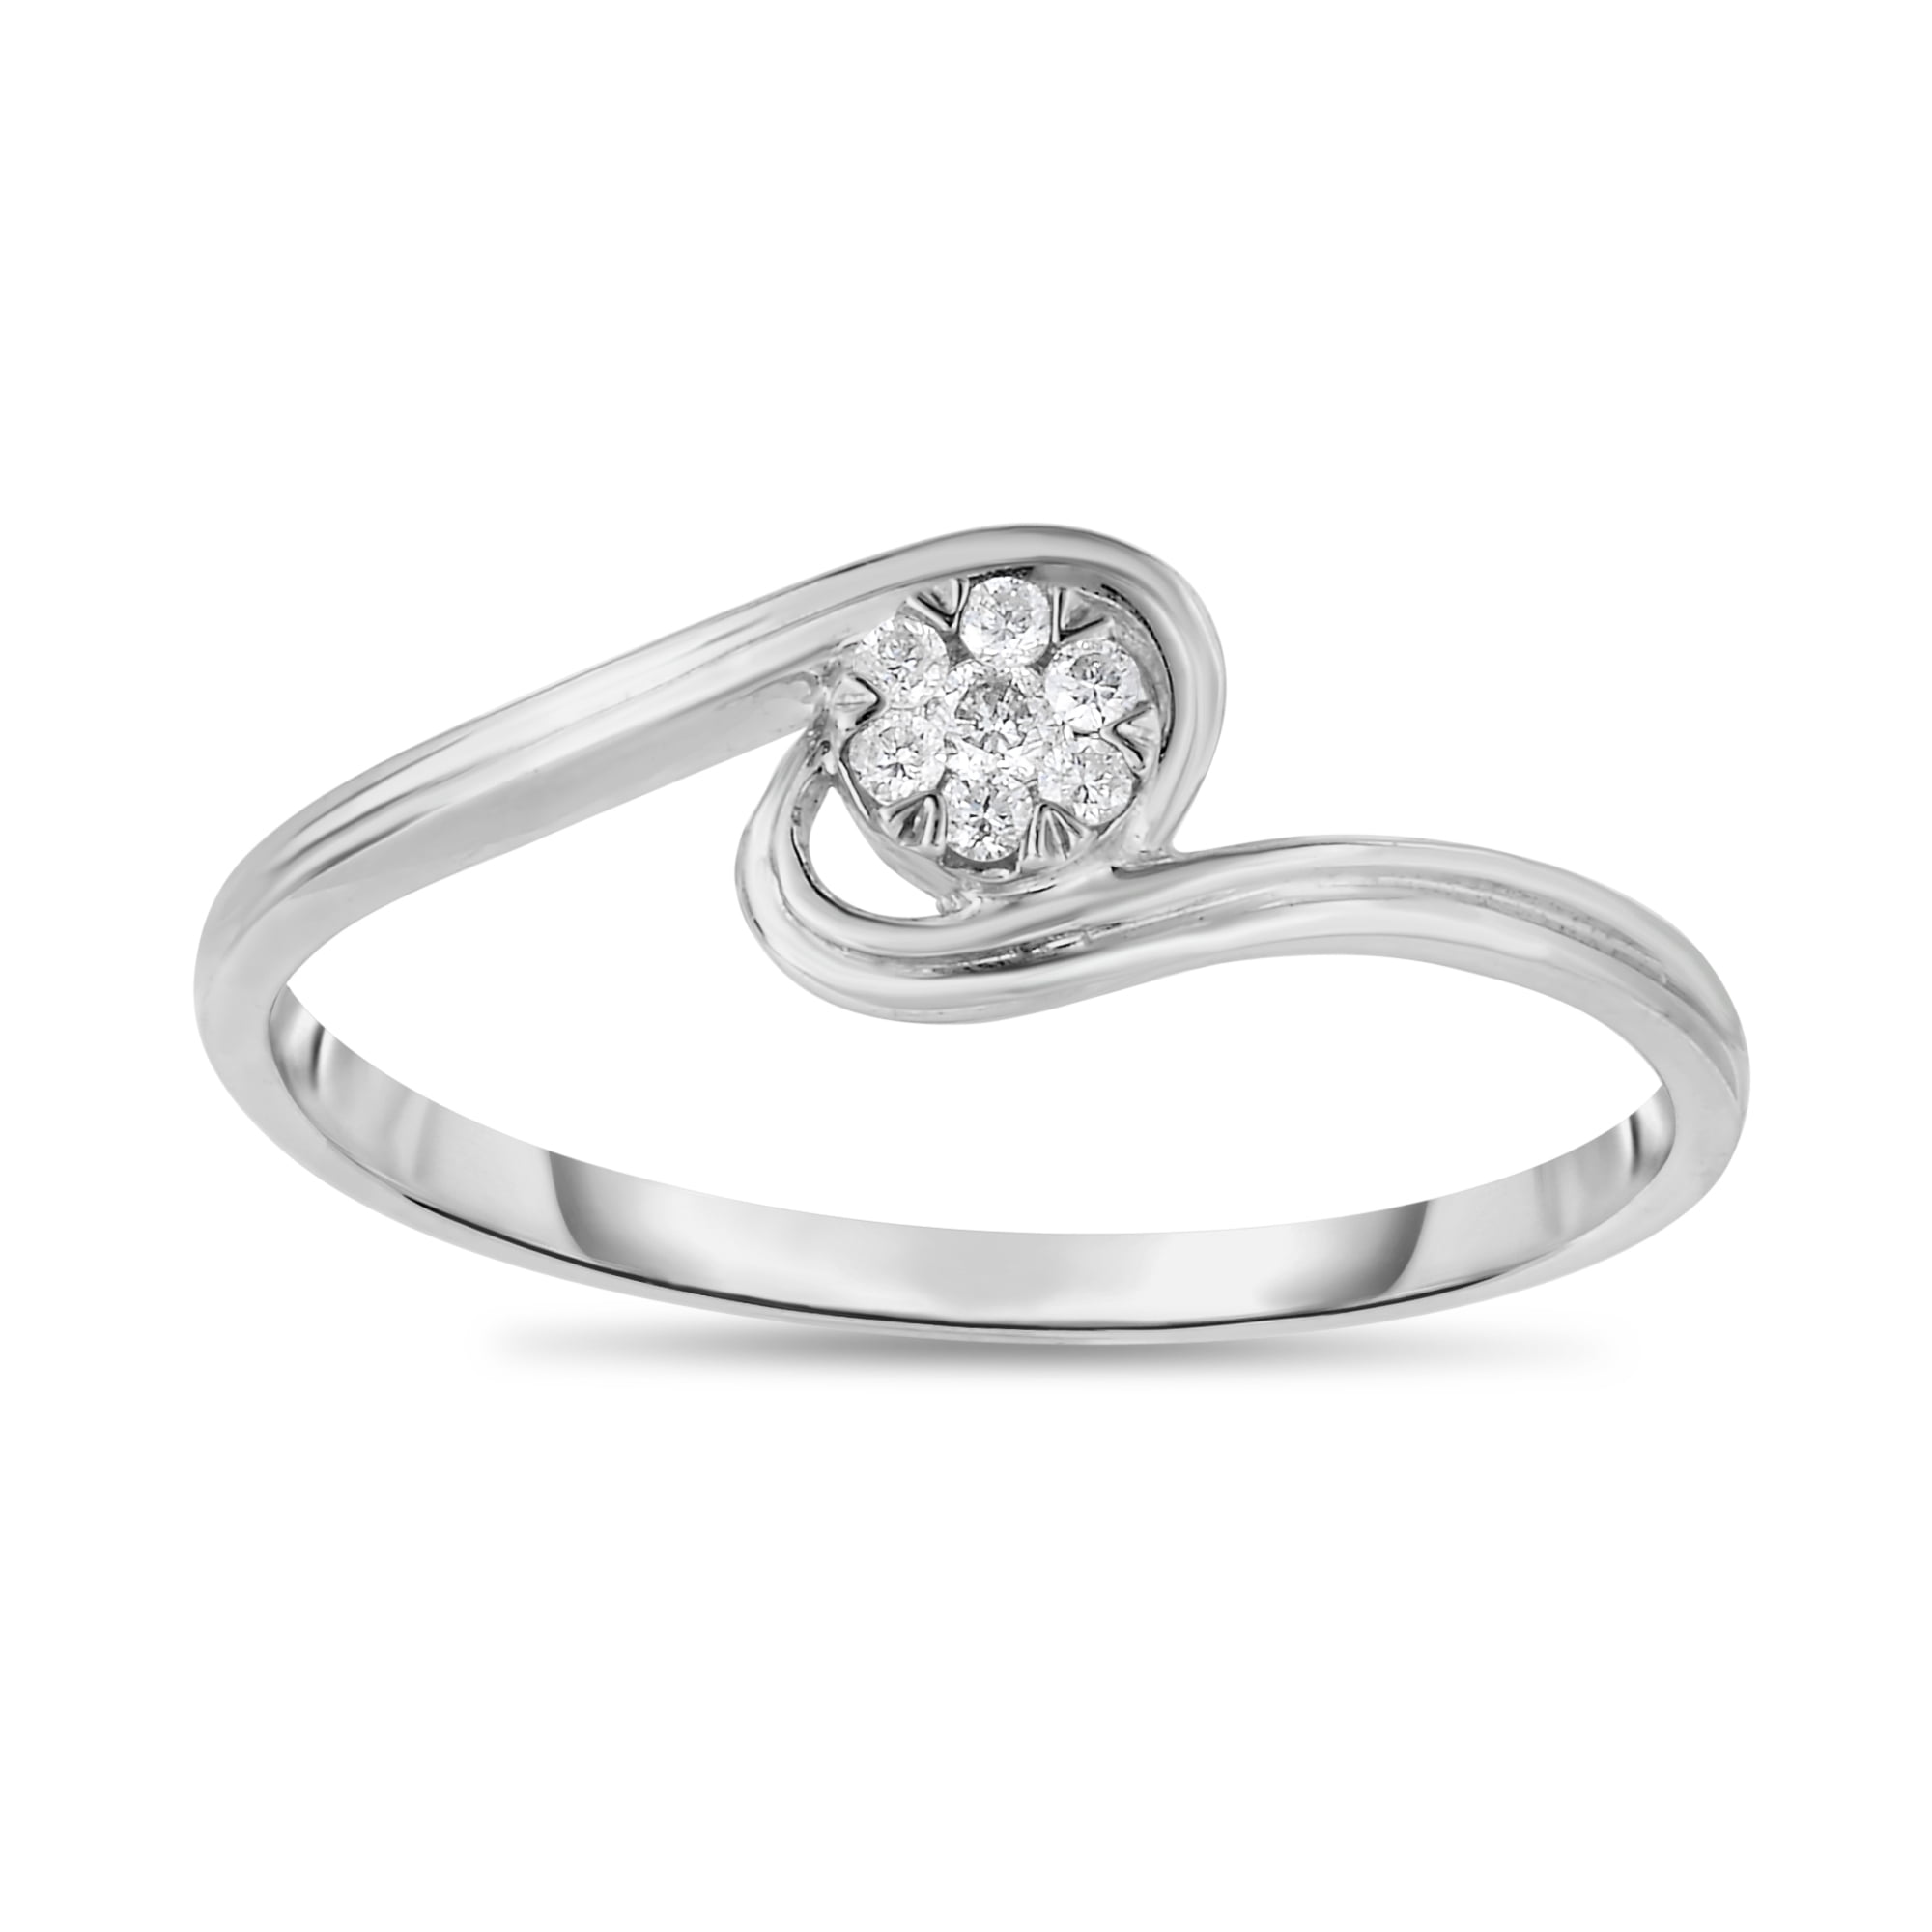 10K White Gold Flared Bypass Engagement Ring with Heart Birthstones and Accents